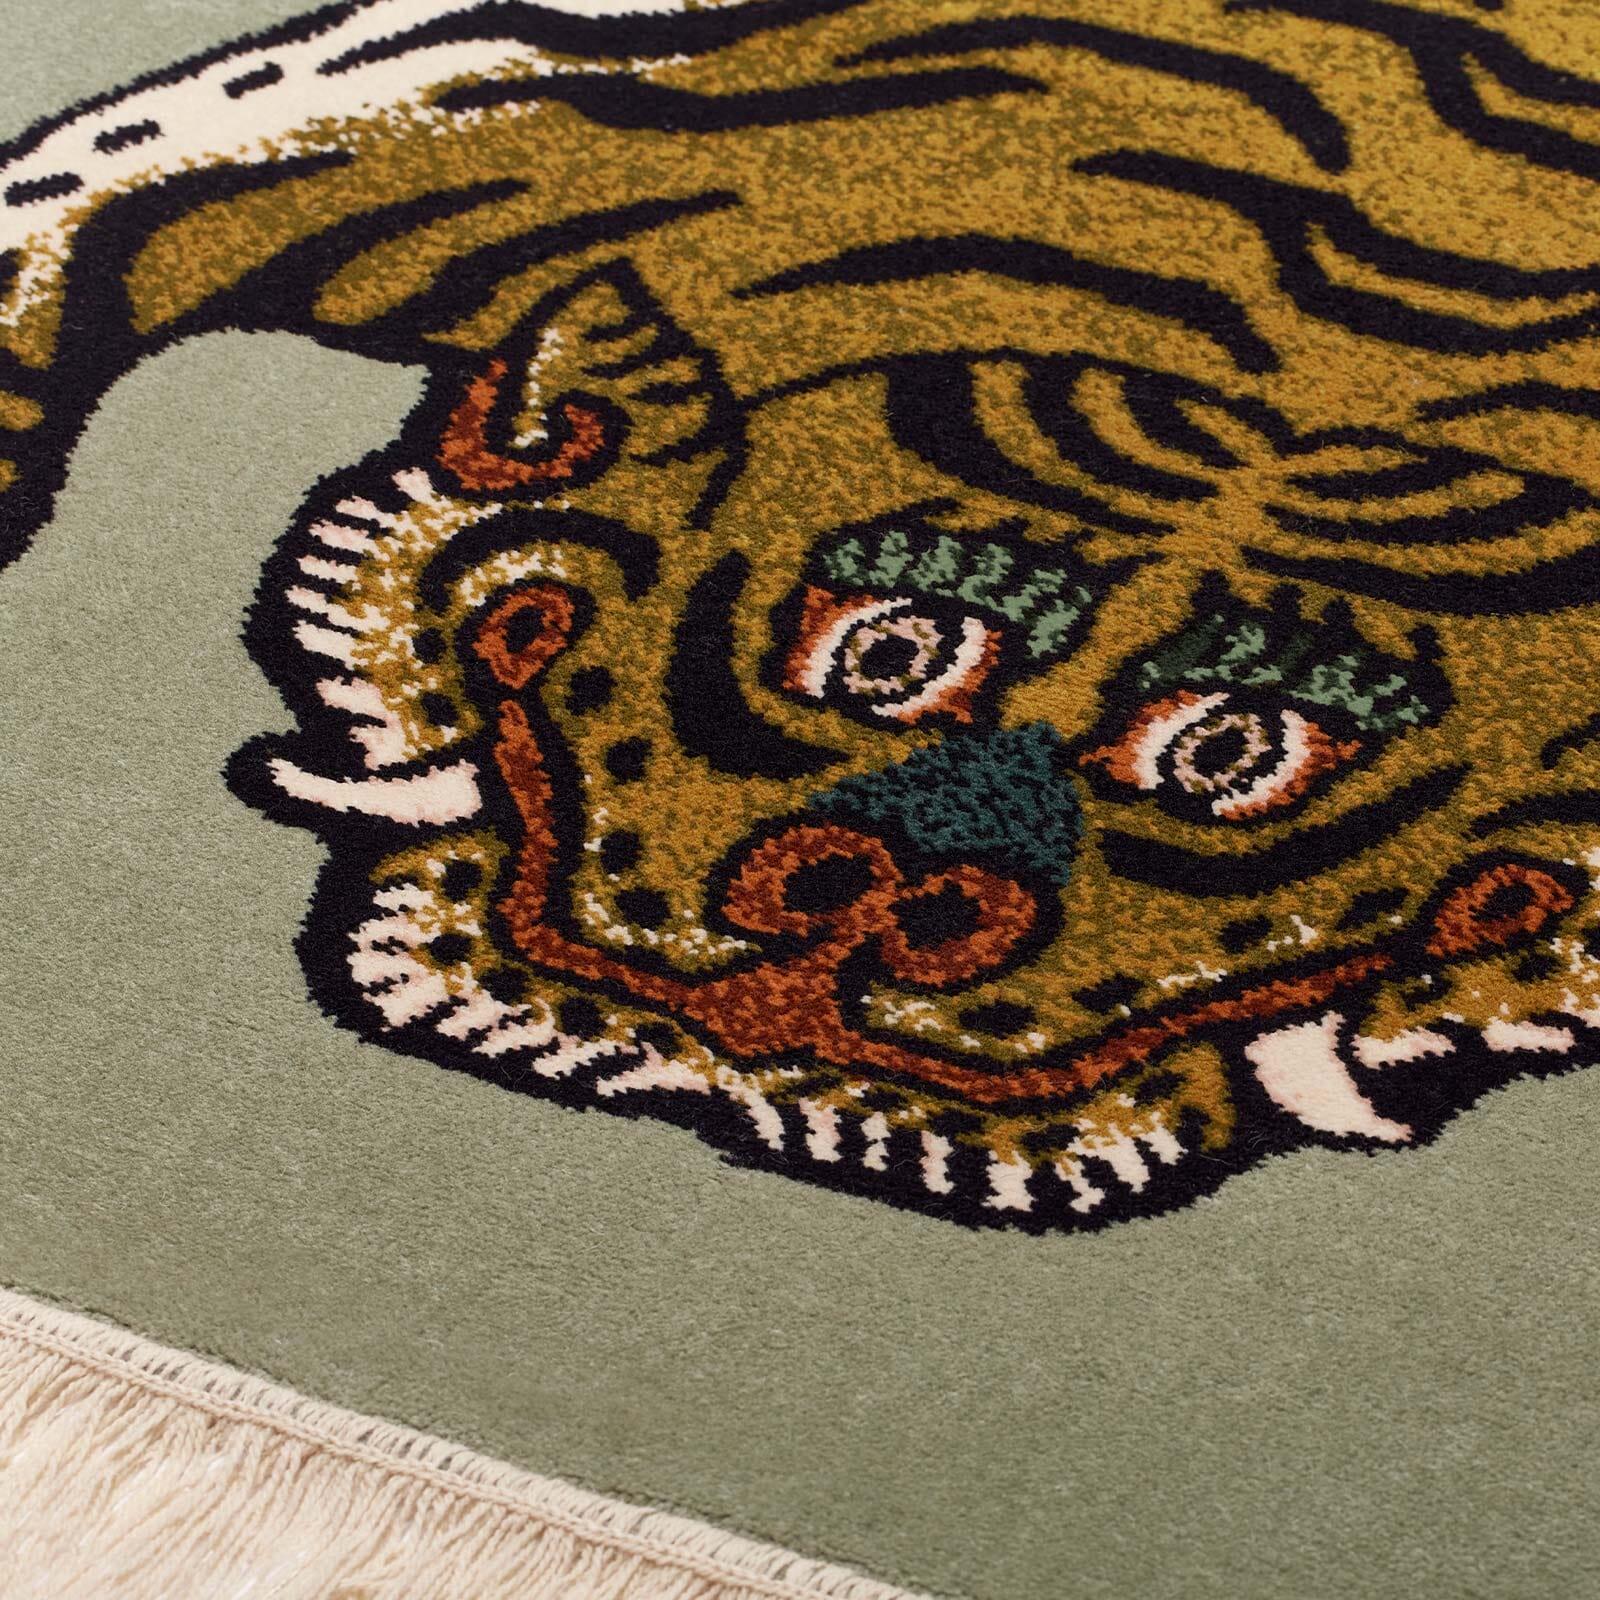 More than just king of the jungle, SABER is king of the home. A much-loved motif that originally clawed inspiration from traditional Tibetan tiger rugs, our House icon has now been reinterpreted as a magnificent floor covering - one that celebrates